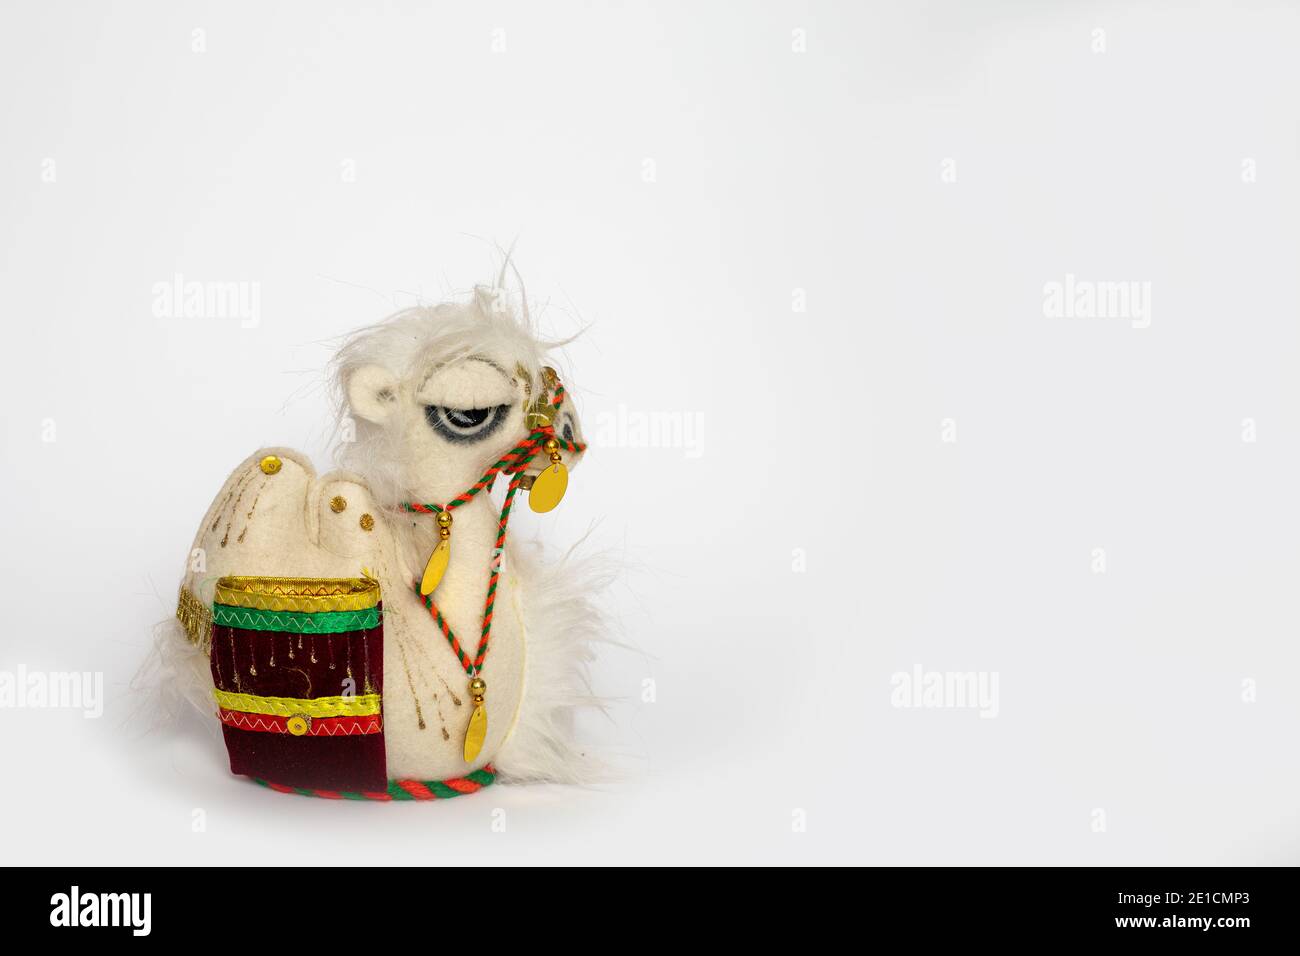 toy camel with colorful blanket on white background Stock Photo